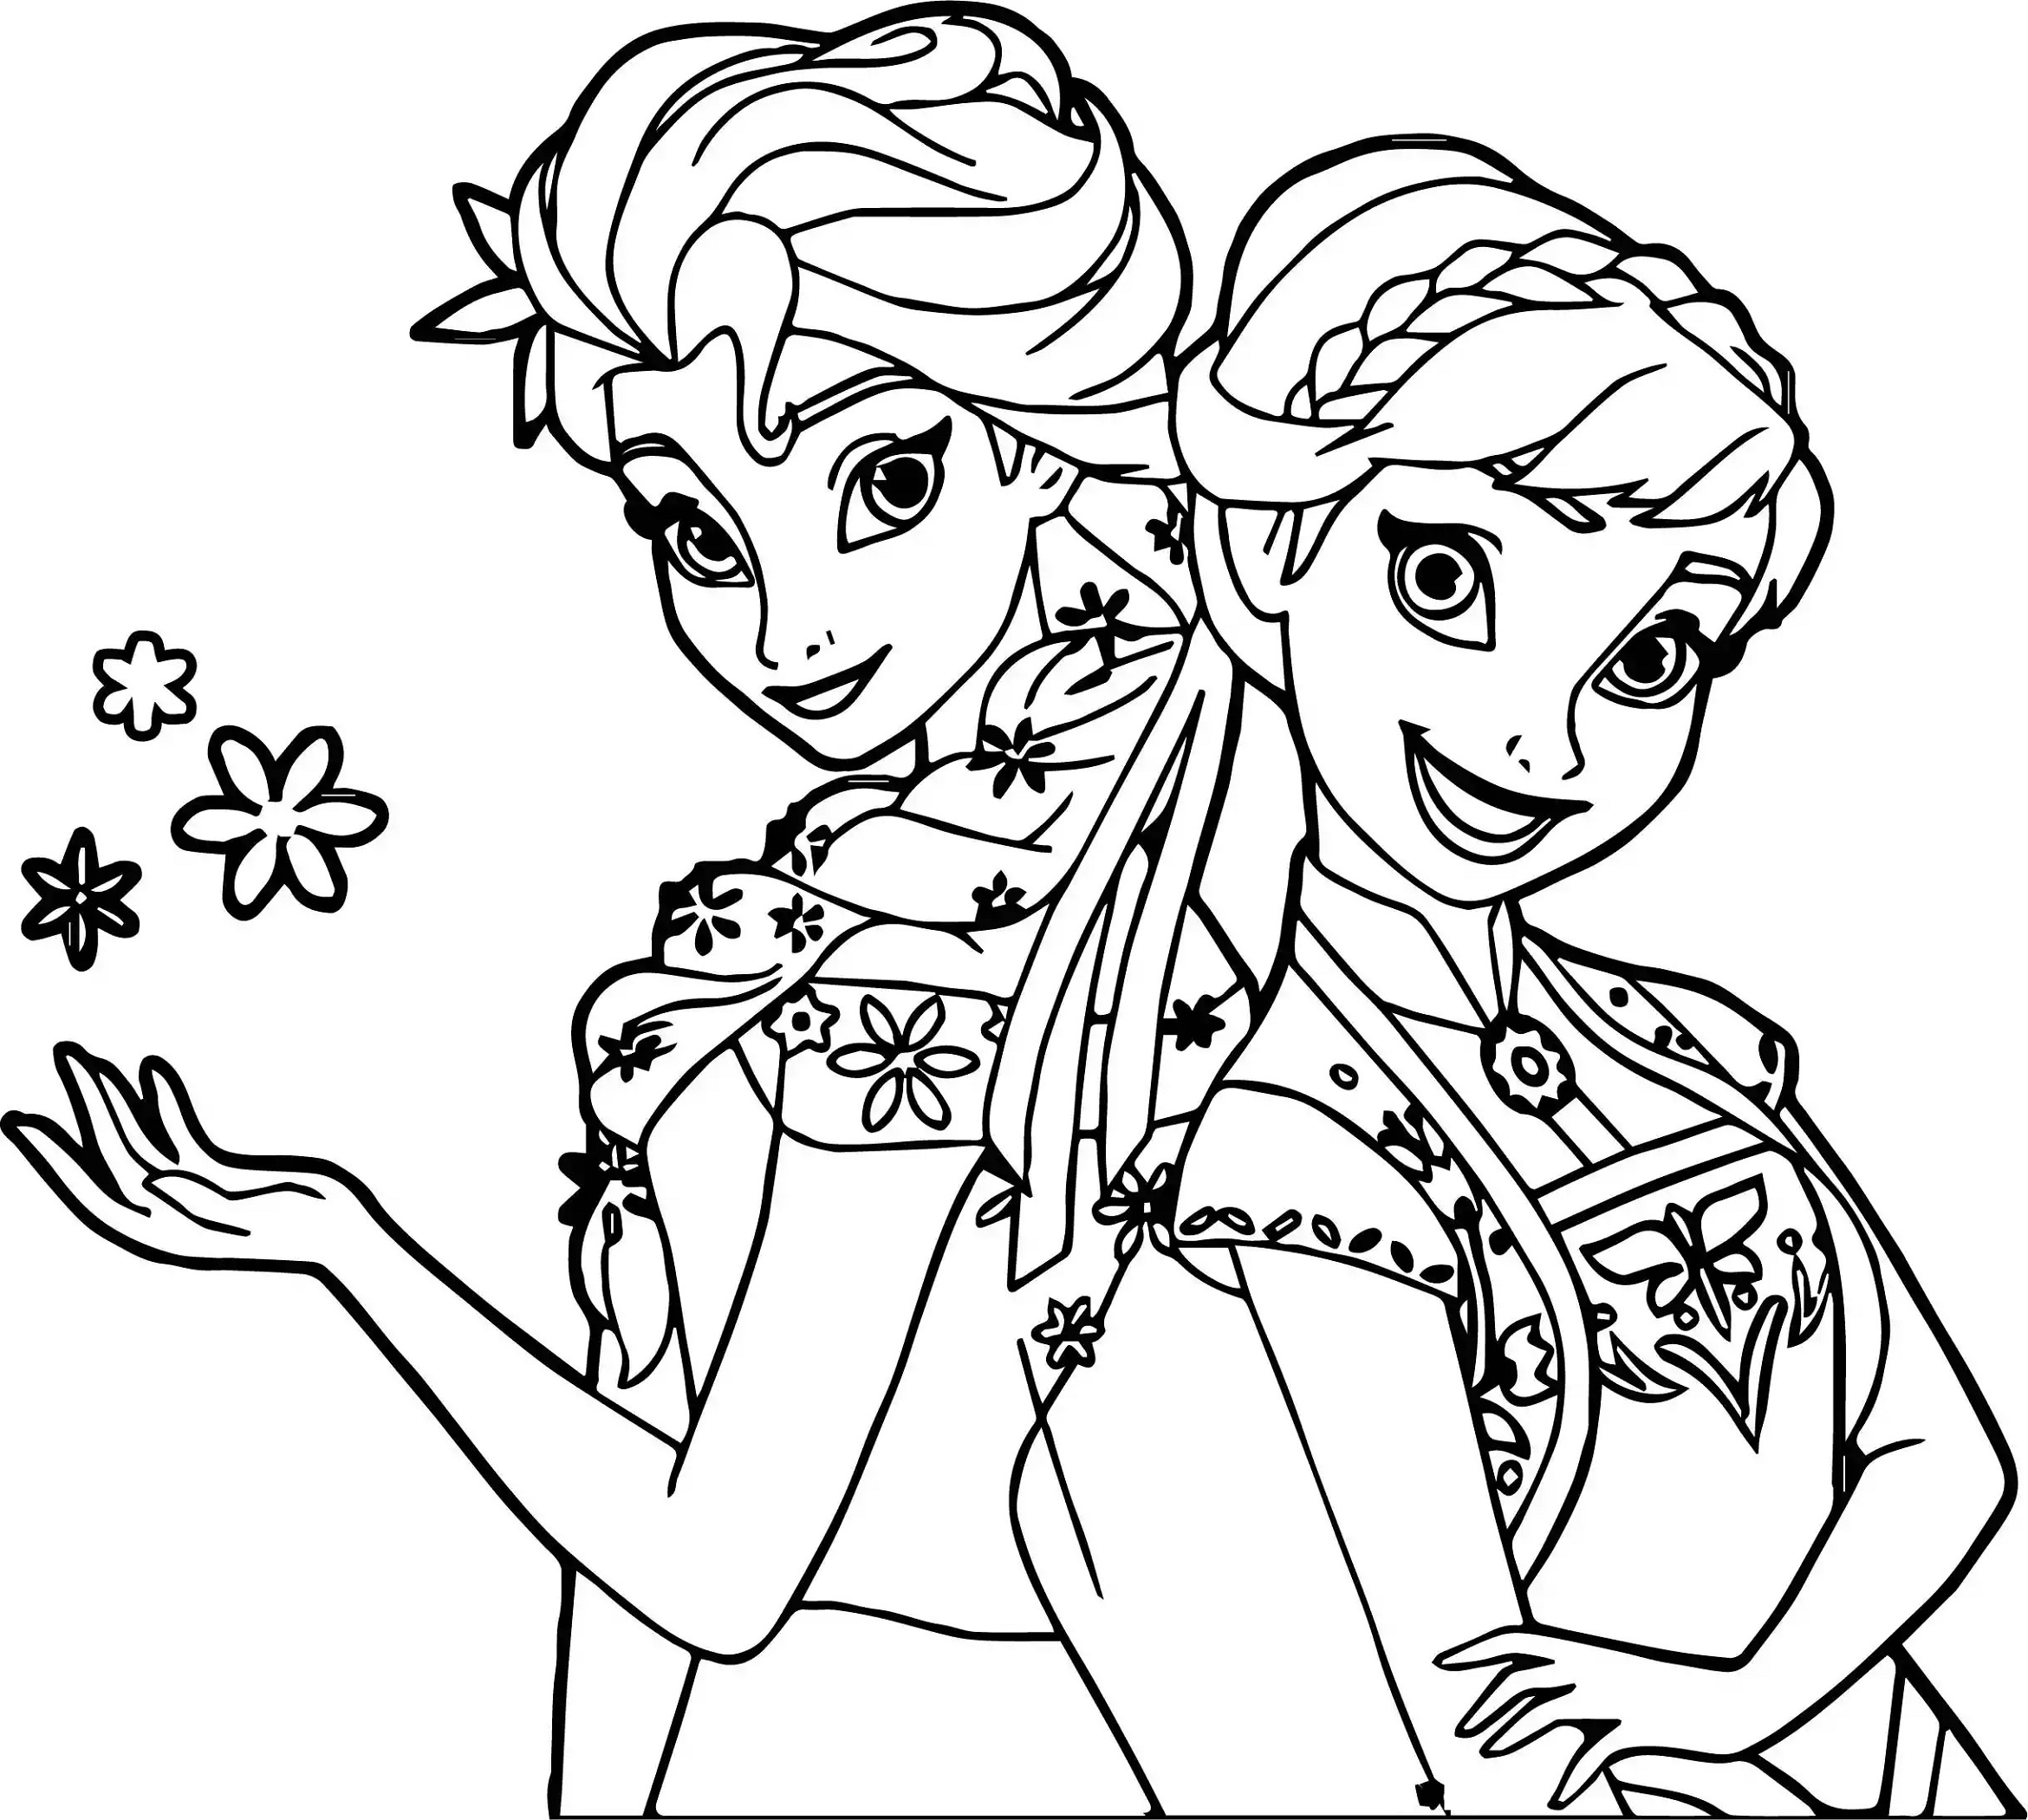 Frozen Fever Coloring Pages Elsa and Anna